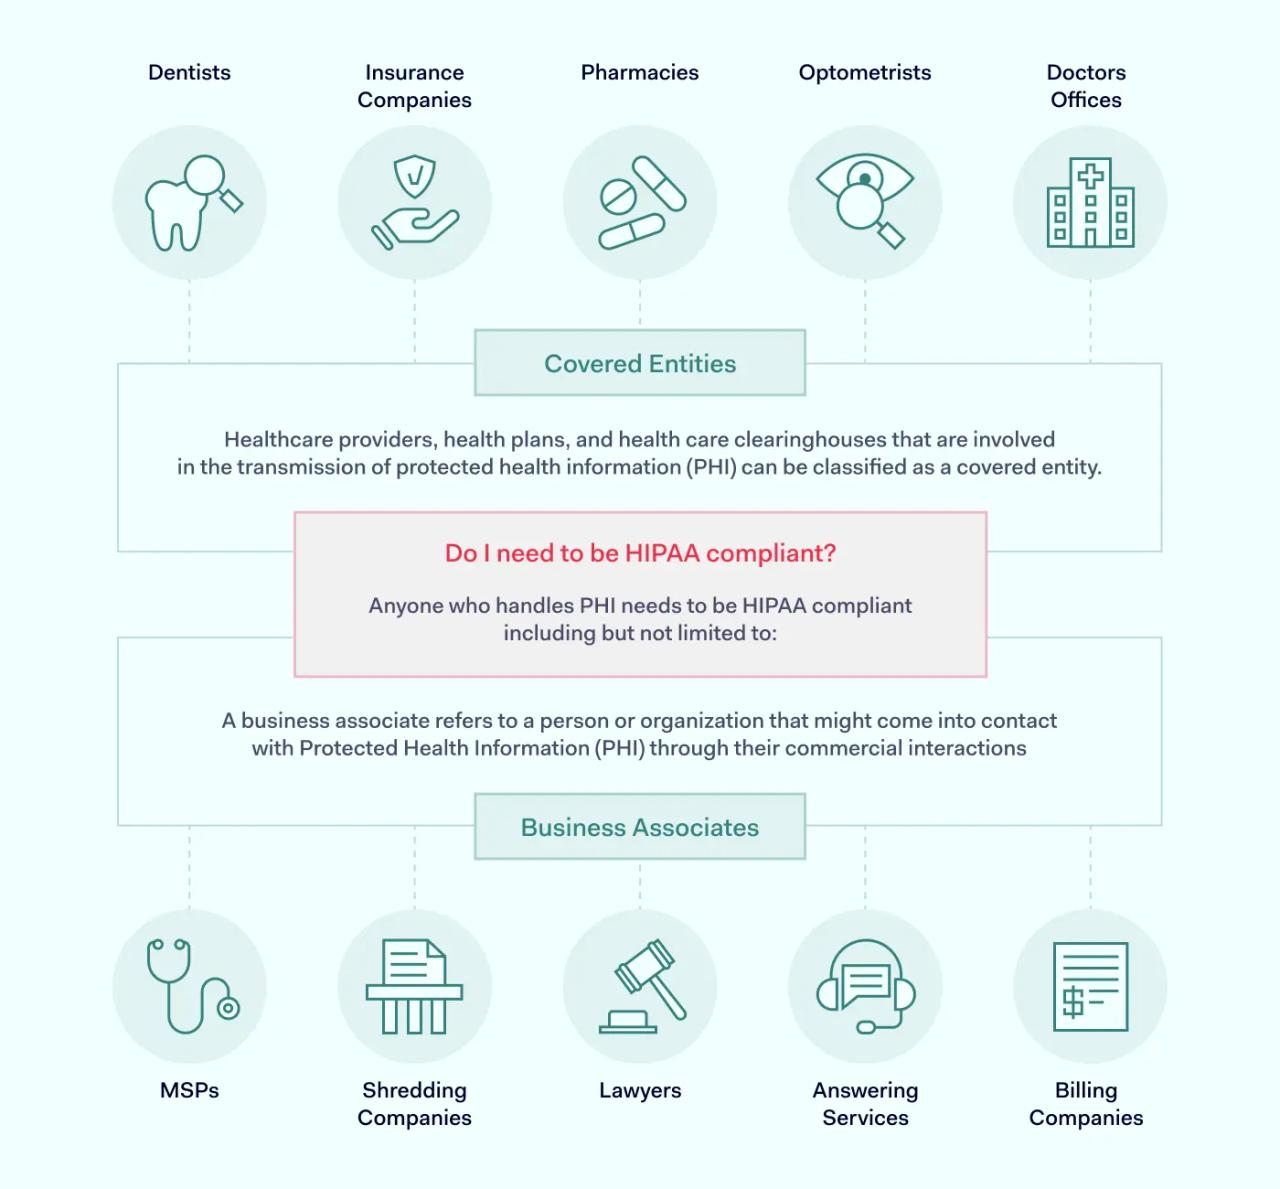 Which organizations need to be HIPAA compliant